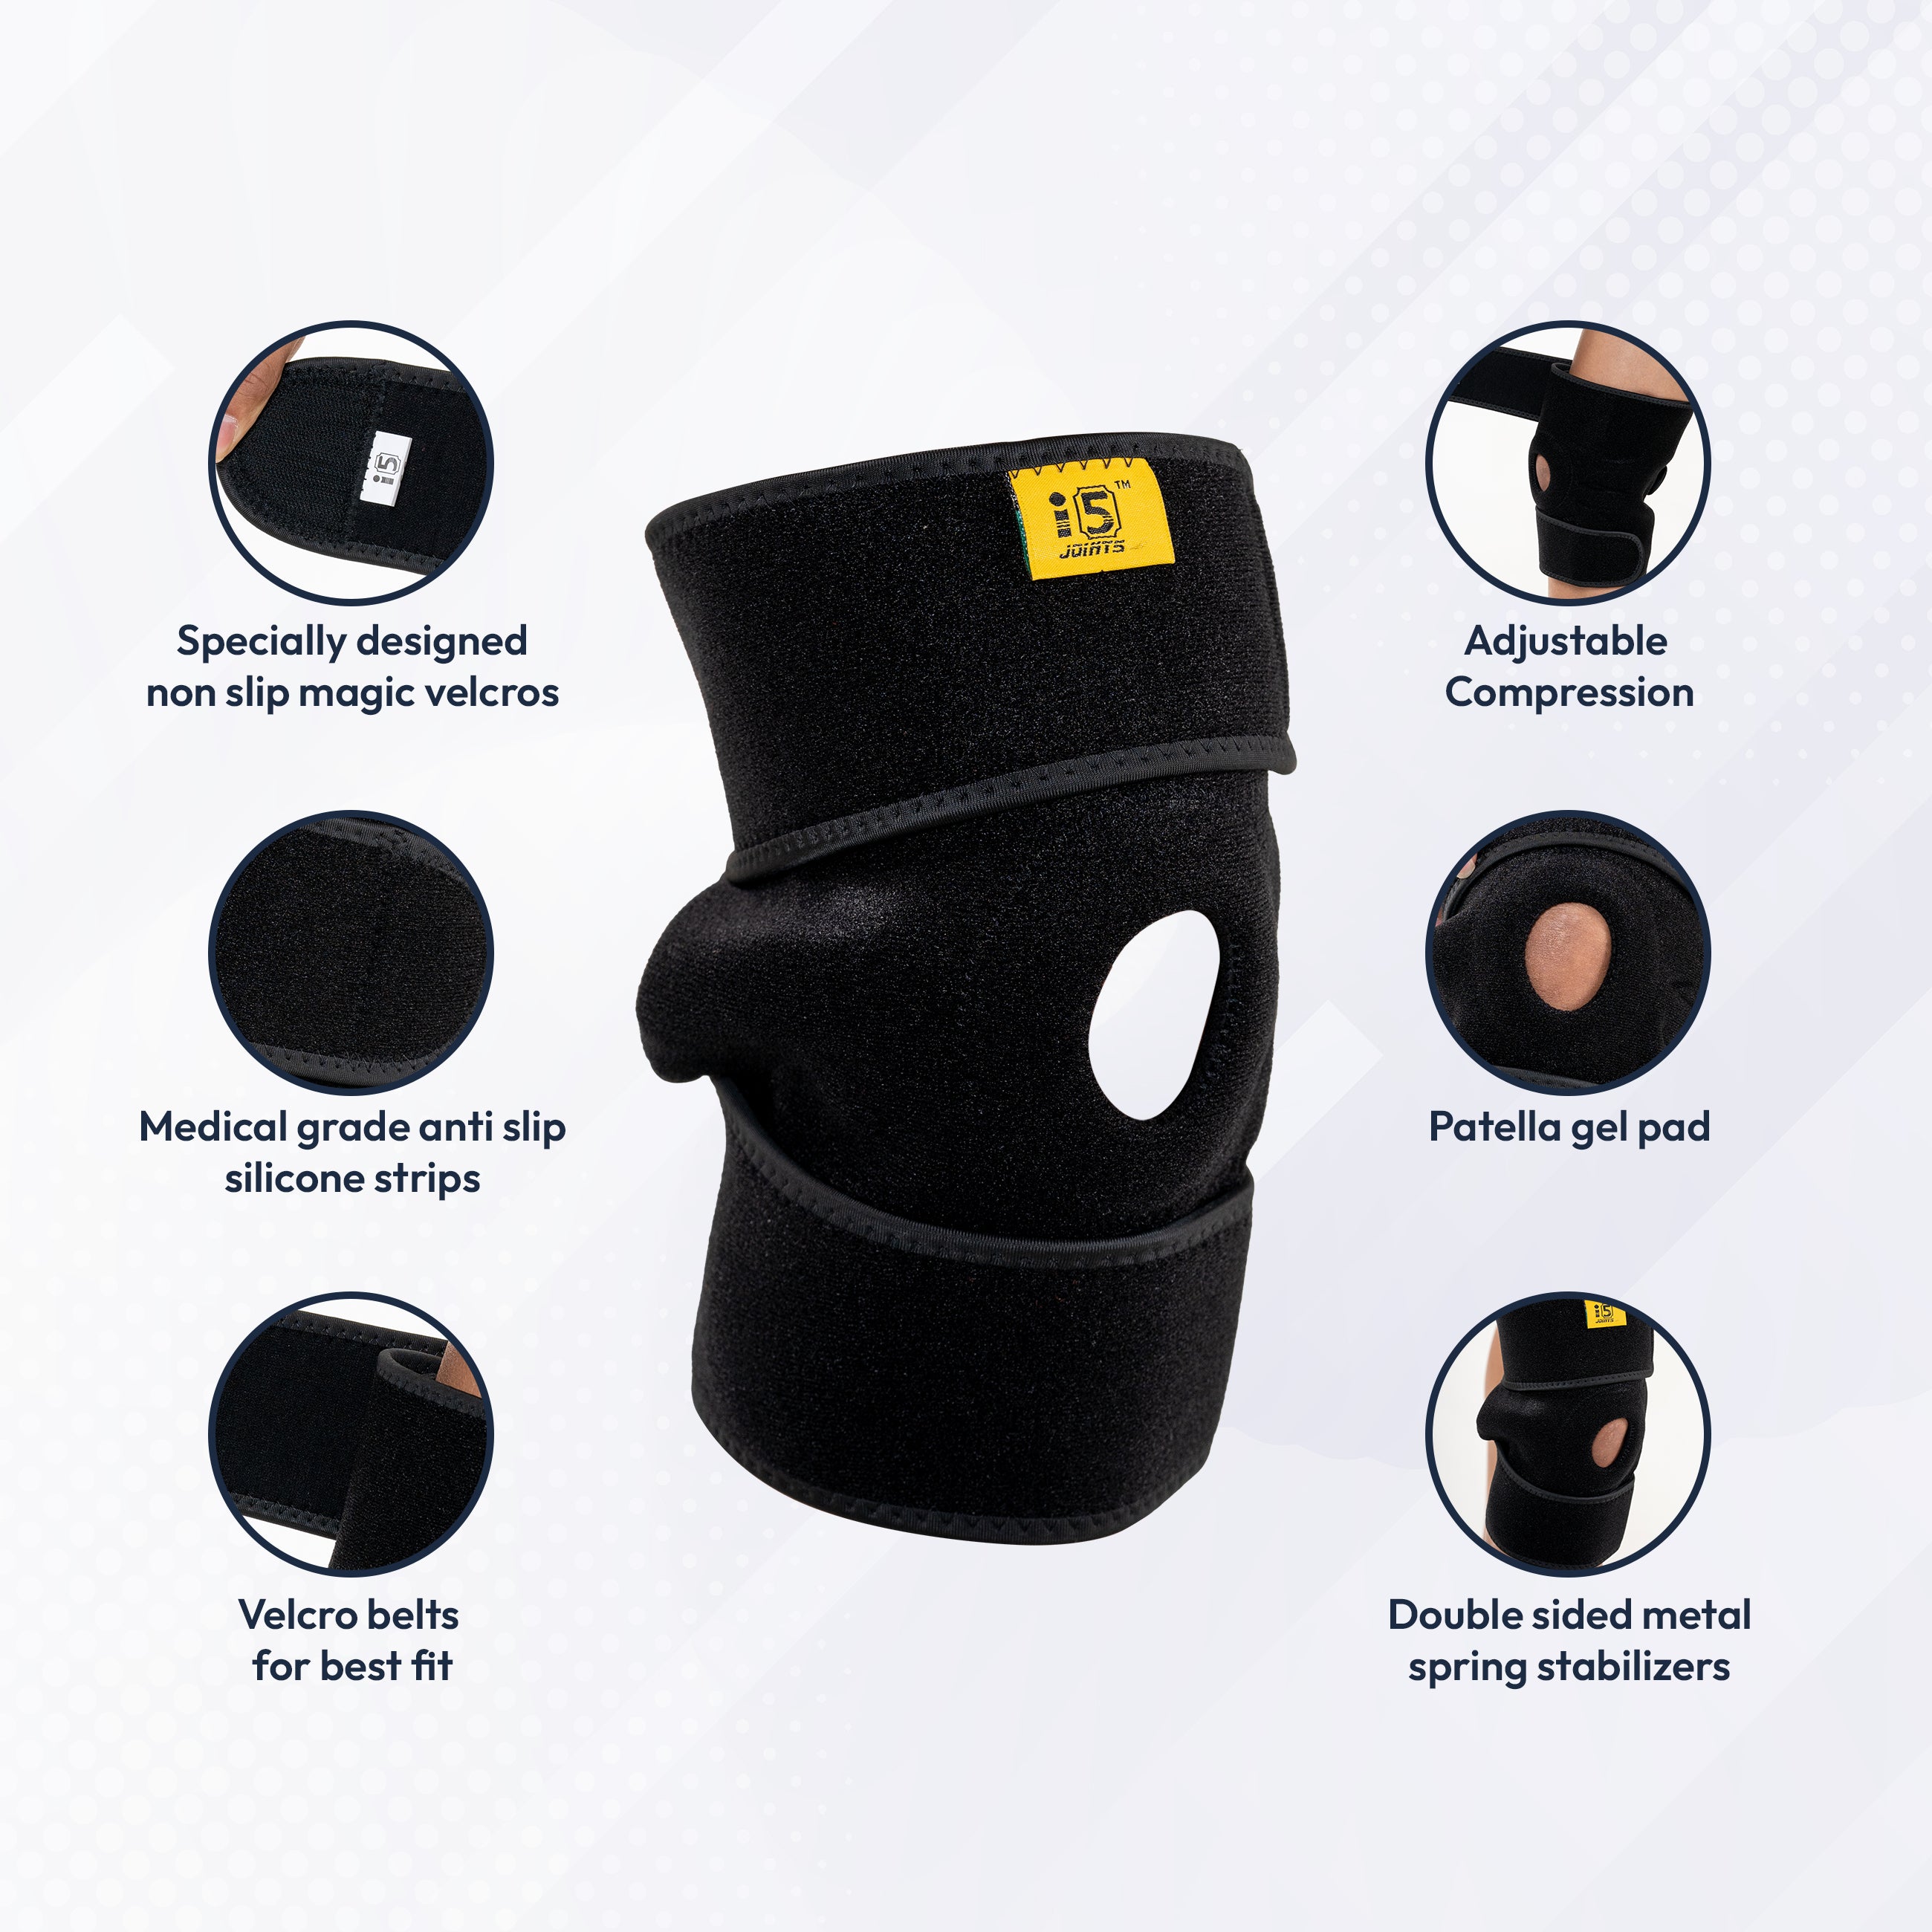 I5Joints-Far Infrared Knee Support(Premium Knee Support Open Patella, Breathable Knee Cap Brace for Arthritis, Pain Relief, Sports for Men & Women )